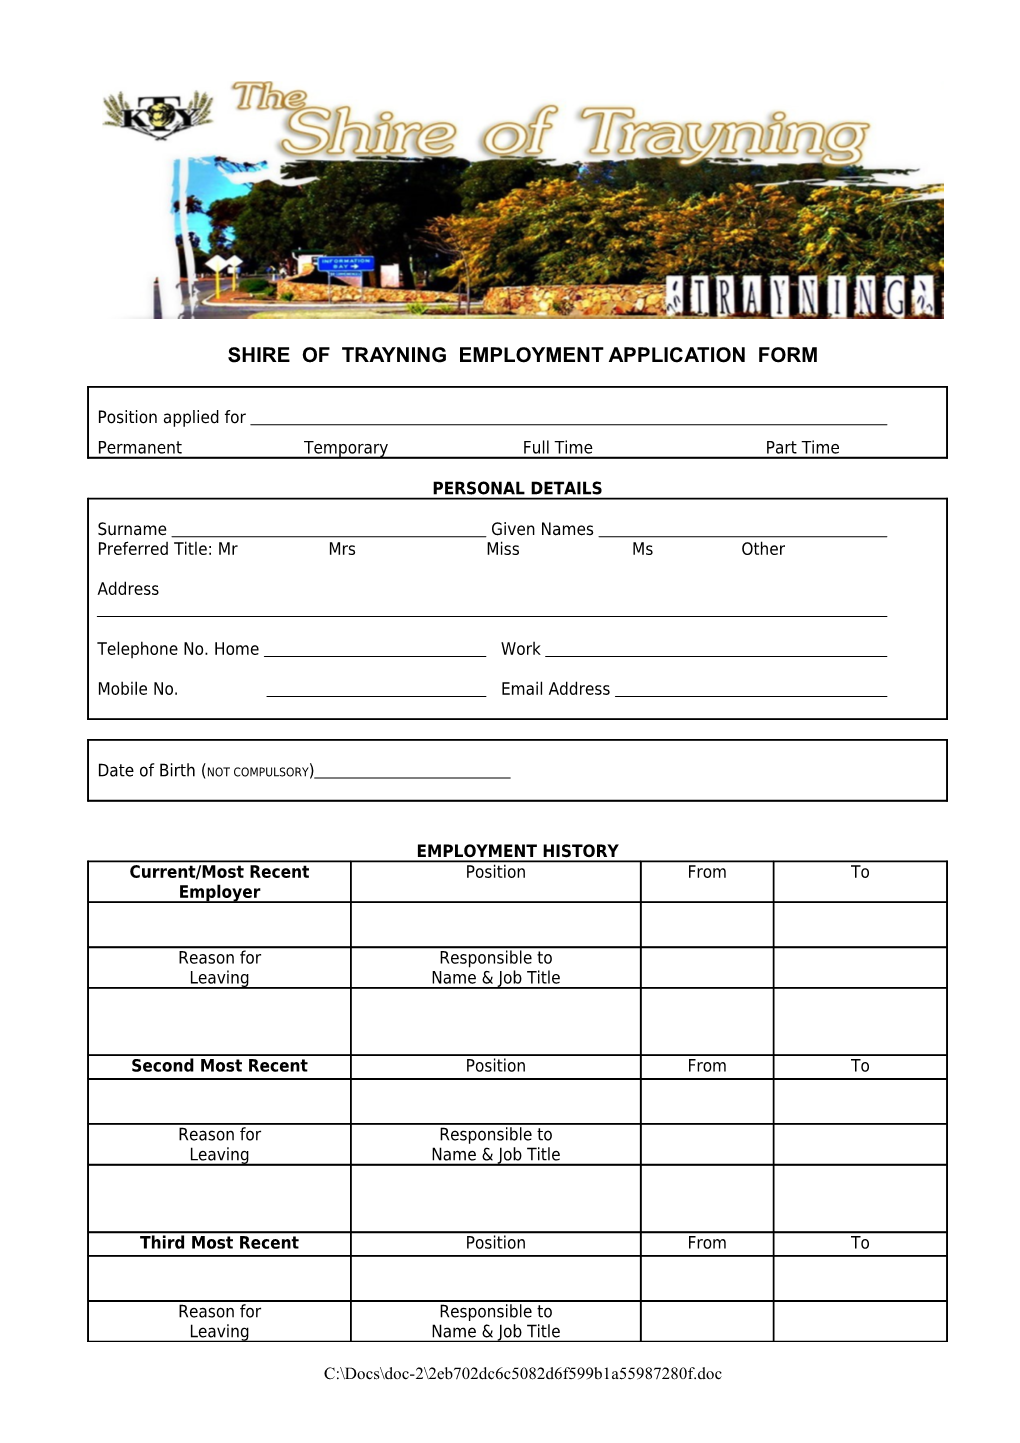 Proforma Application Form for Employment